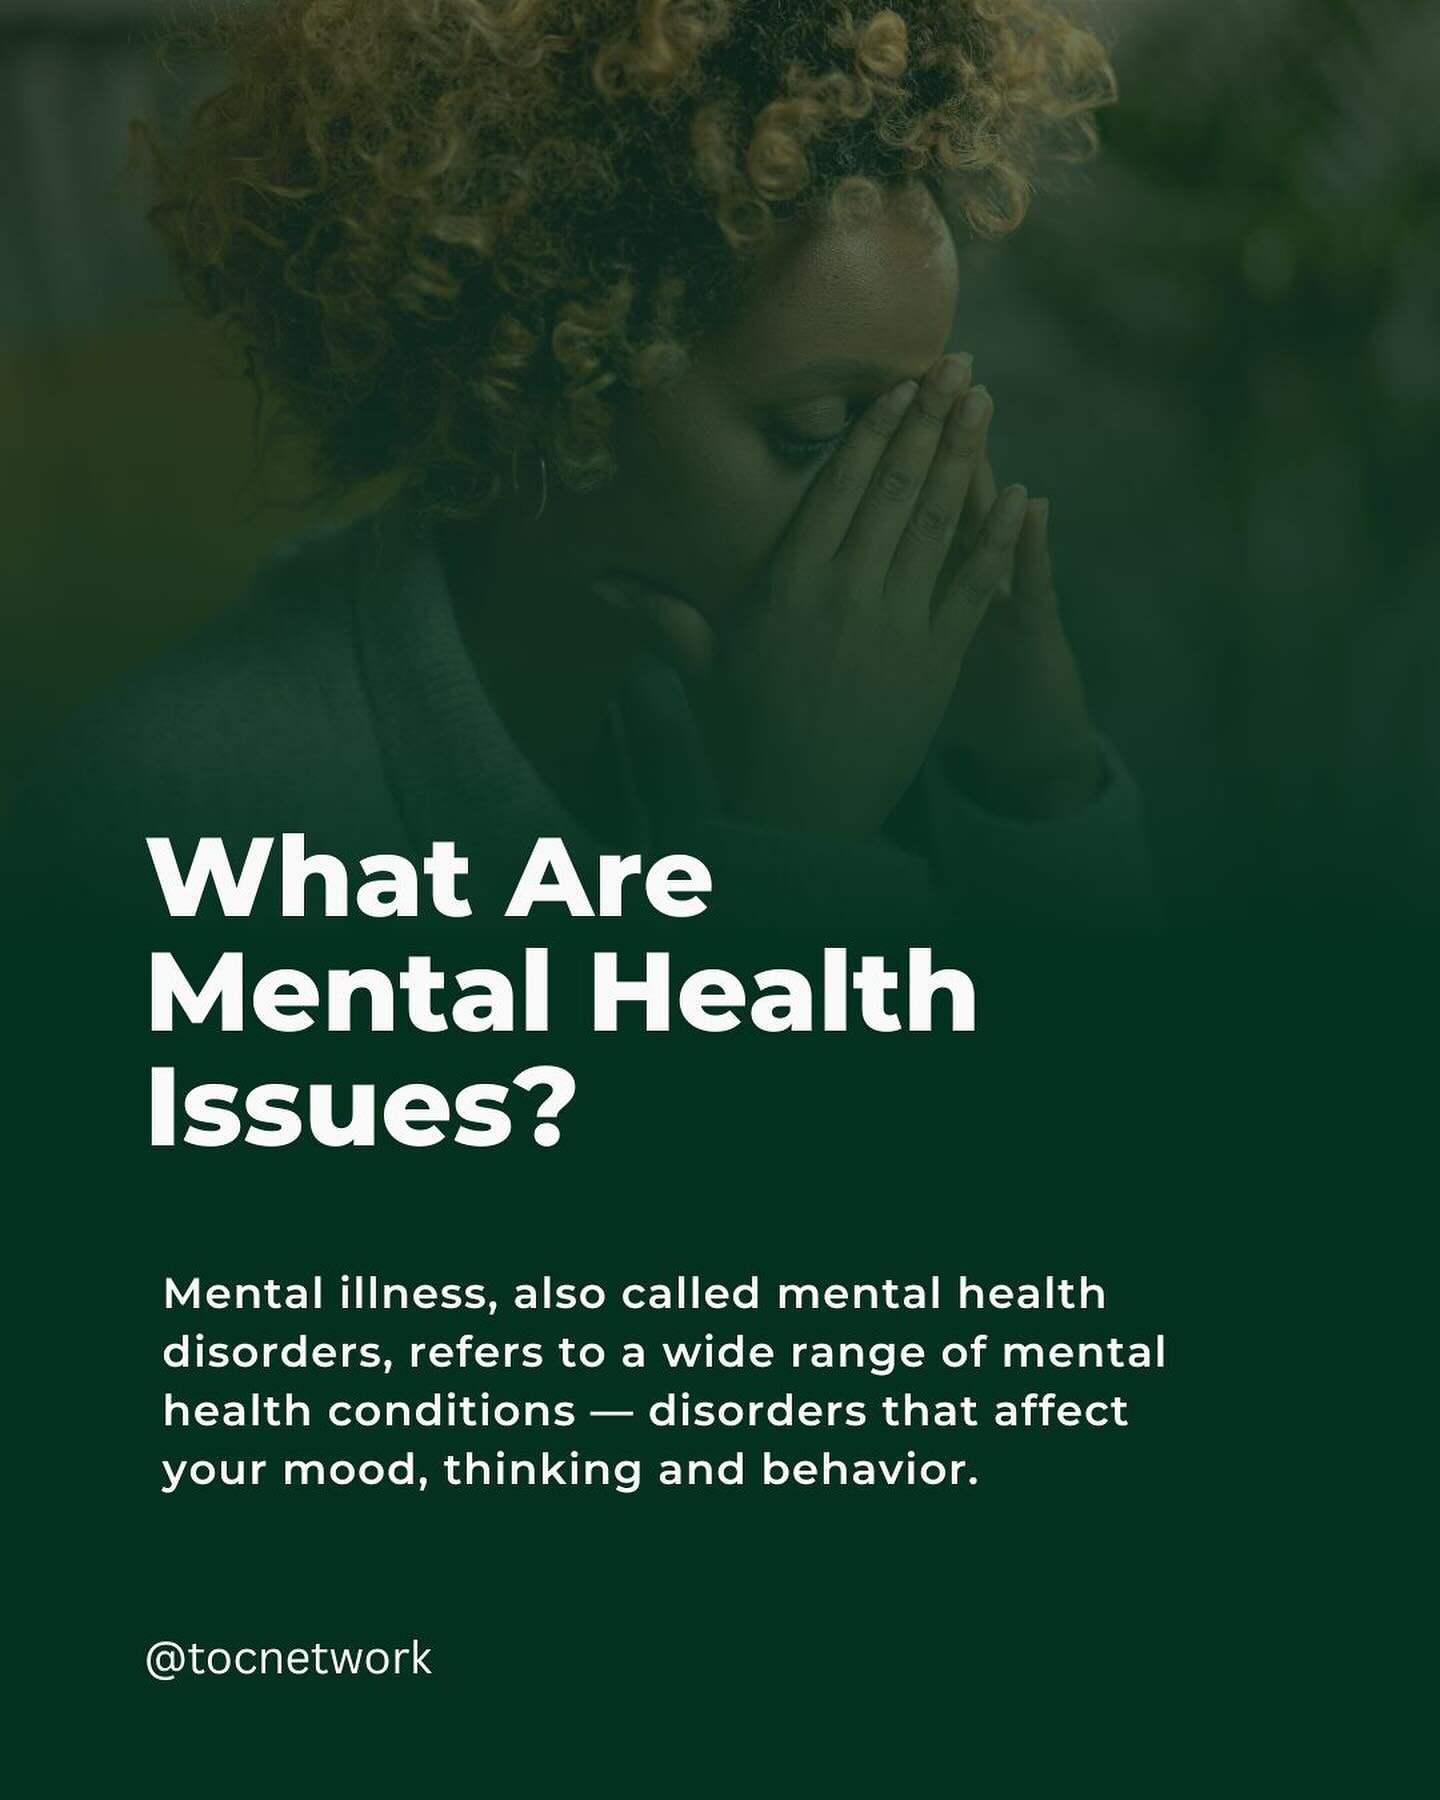 A mental illness is a condition that affects a person&rsquo;s thinking, feeling or mood. 

It&rsquo;s more common than you think &mdash; 1 in 5 individuals experiences a mental illness. 
Source: @namicommunicate 

If you or someone you know experienc